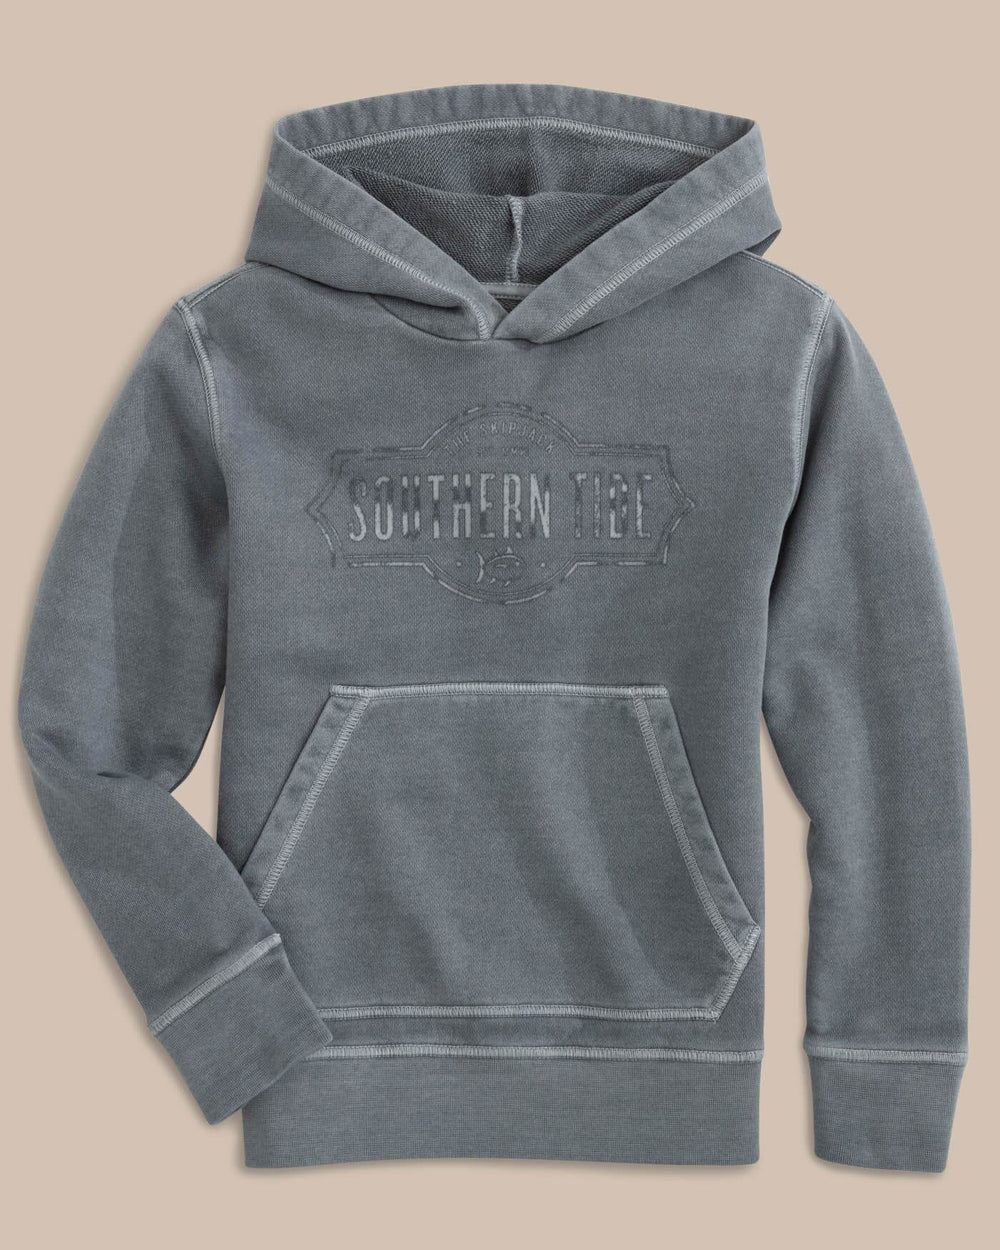 The front view of the Southern Tide Kids Sun Farer Upper Deck Long Sleeve Hoodie by Southern Tide - Harbour Mist